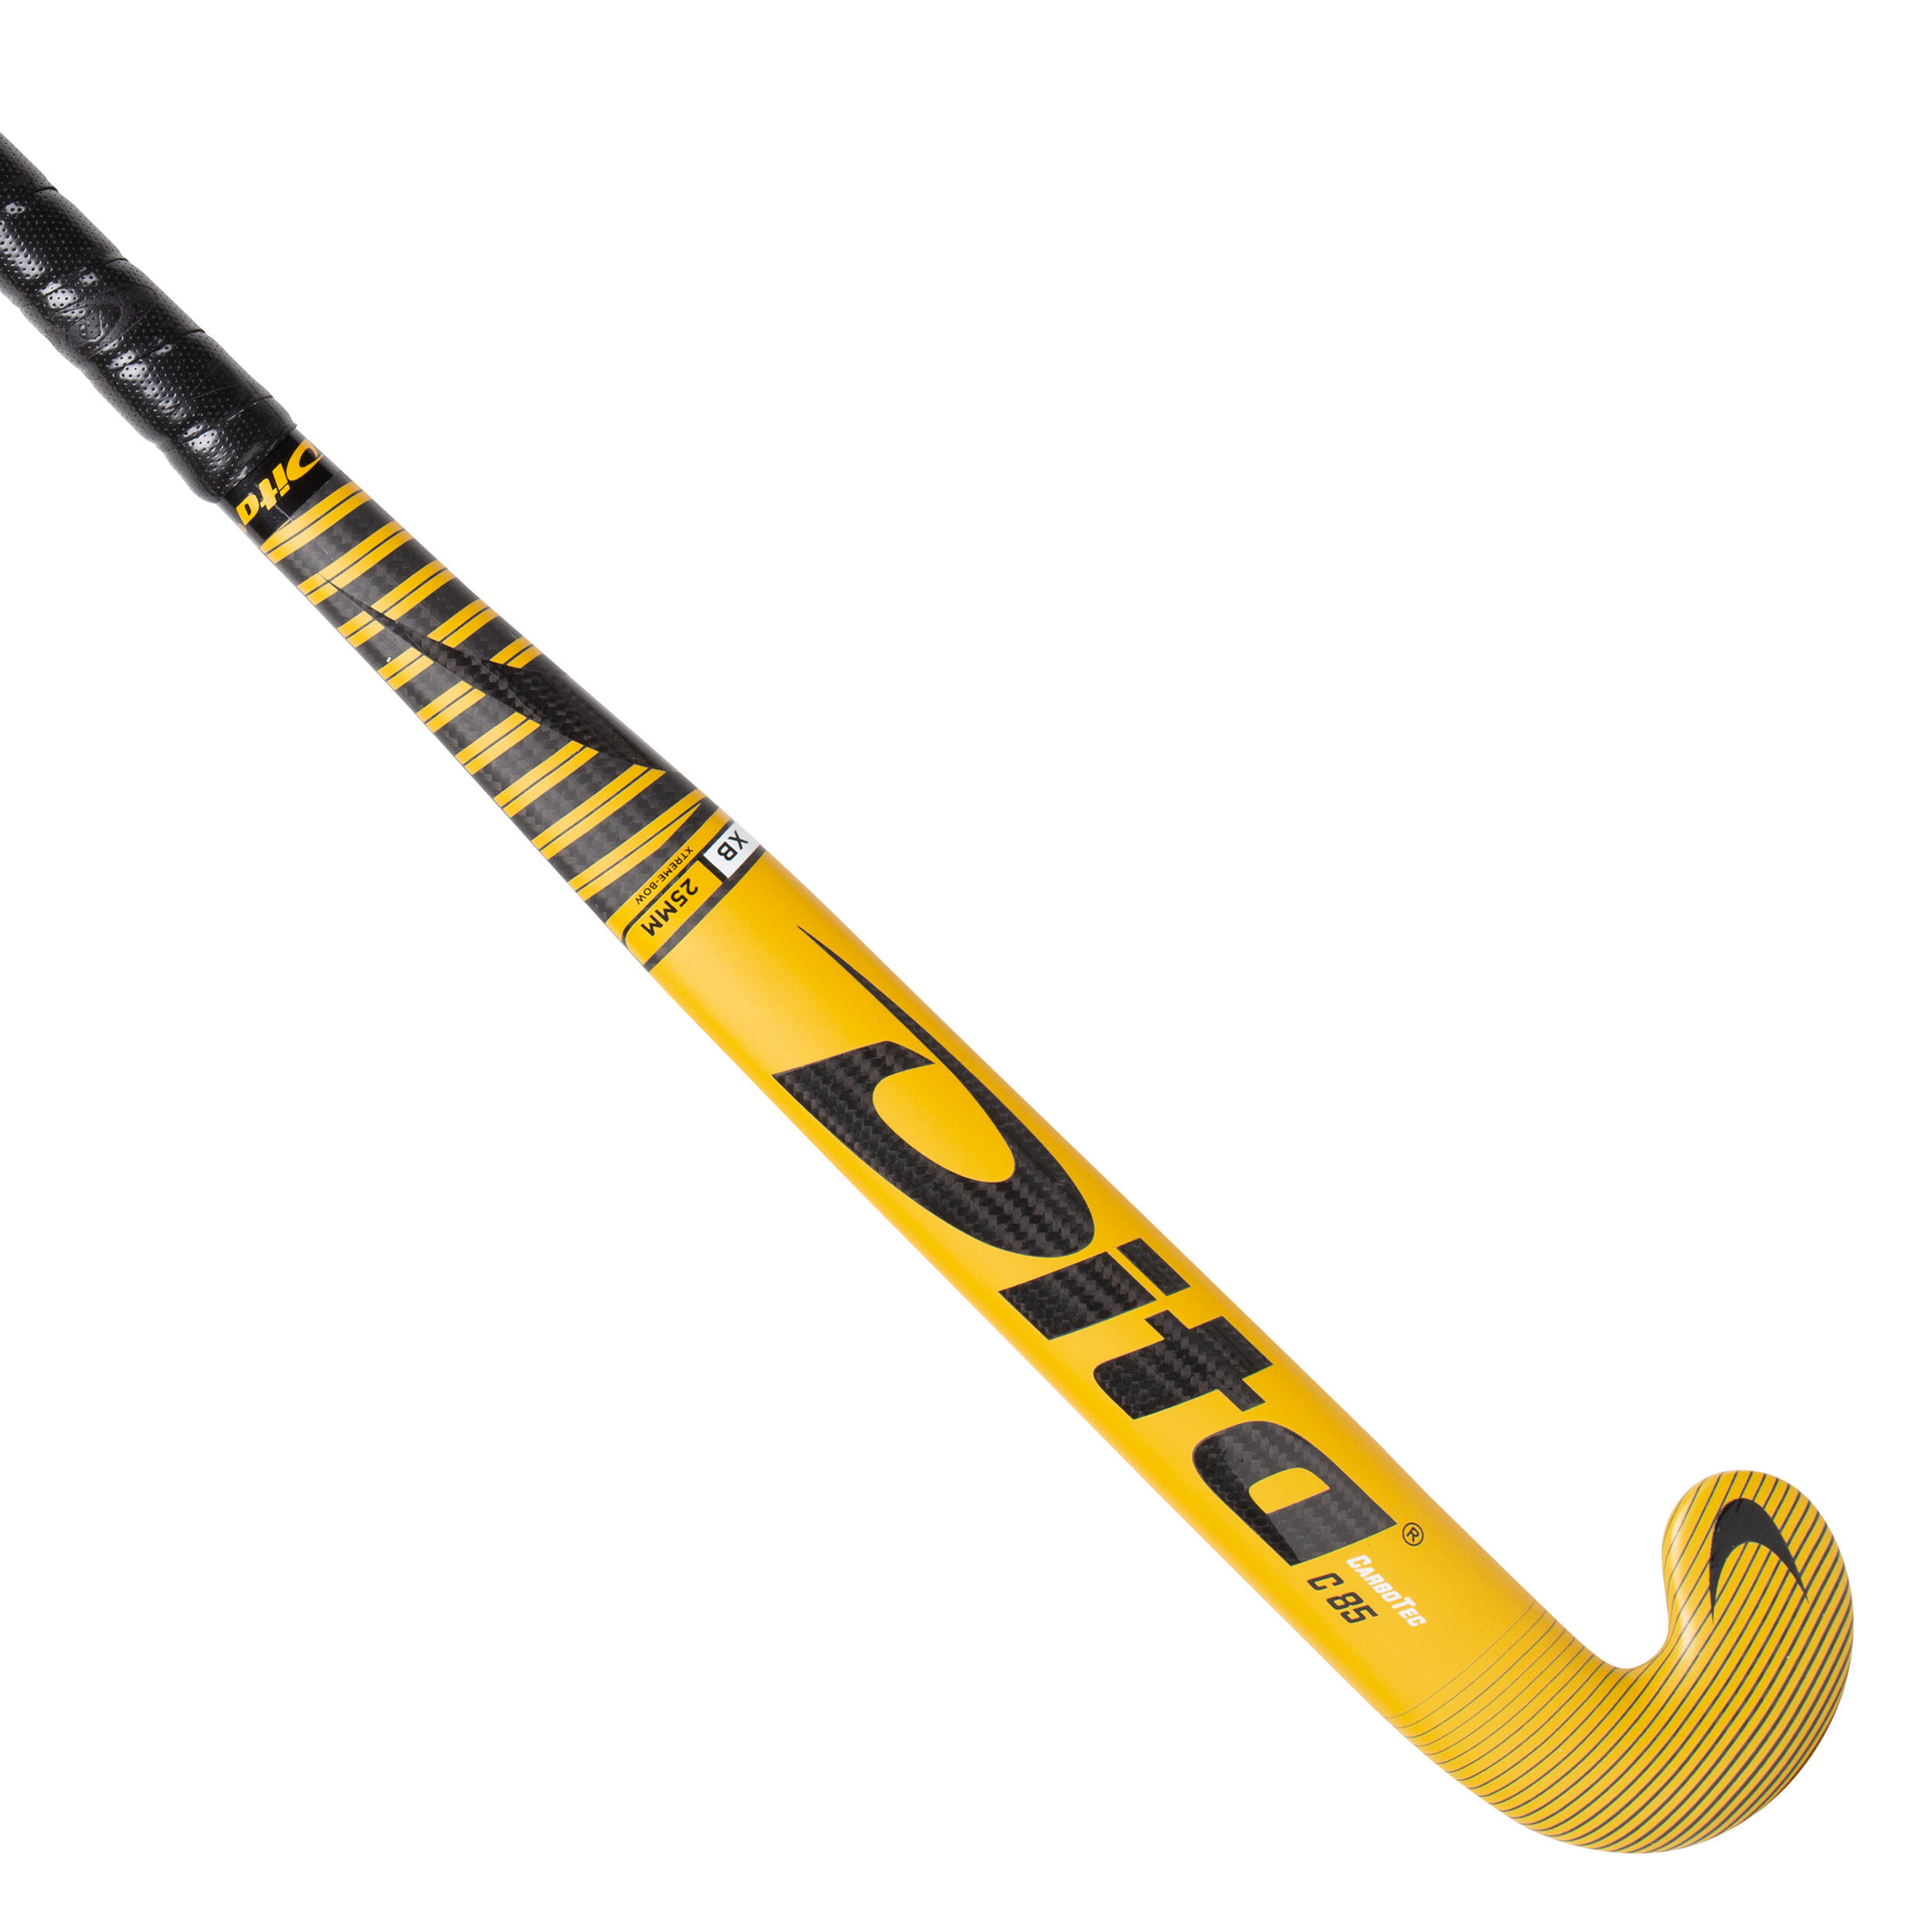 Adult Advanced 85% Carbon X Low Bow Field Hockey Stick carbotecC85 - Gold/Black 1/13